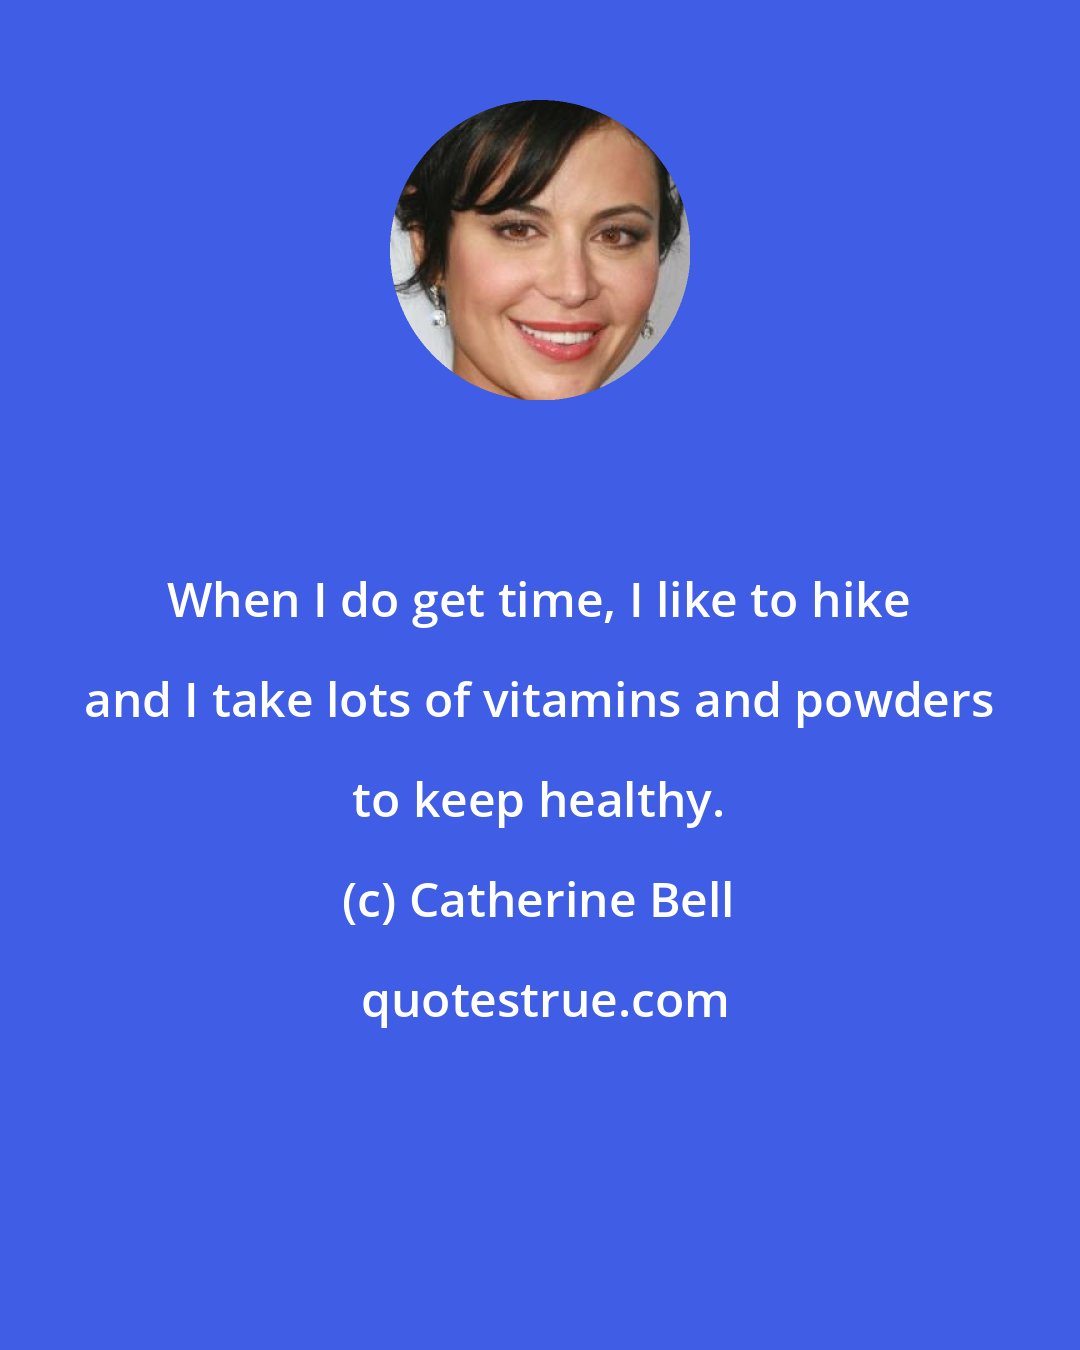 Catherine Bell: When I do get time, I like to hike and I take lots of vitamins and powders to keep healthy.